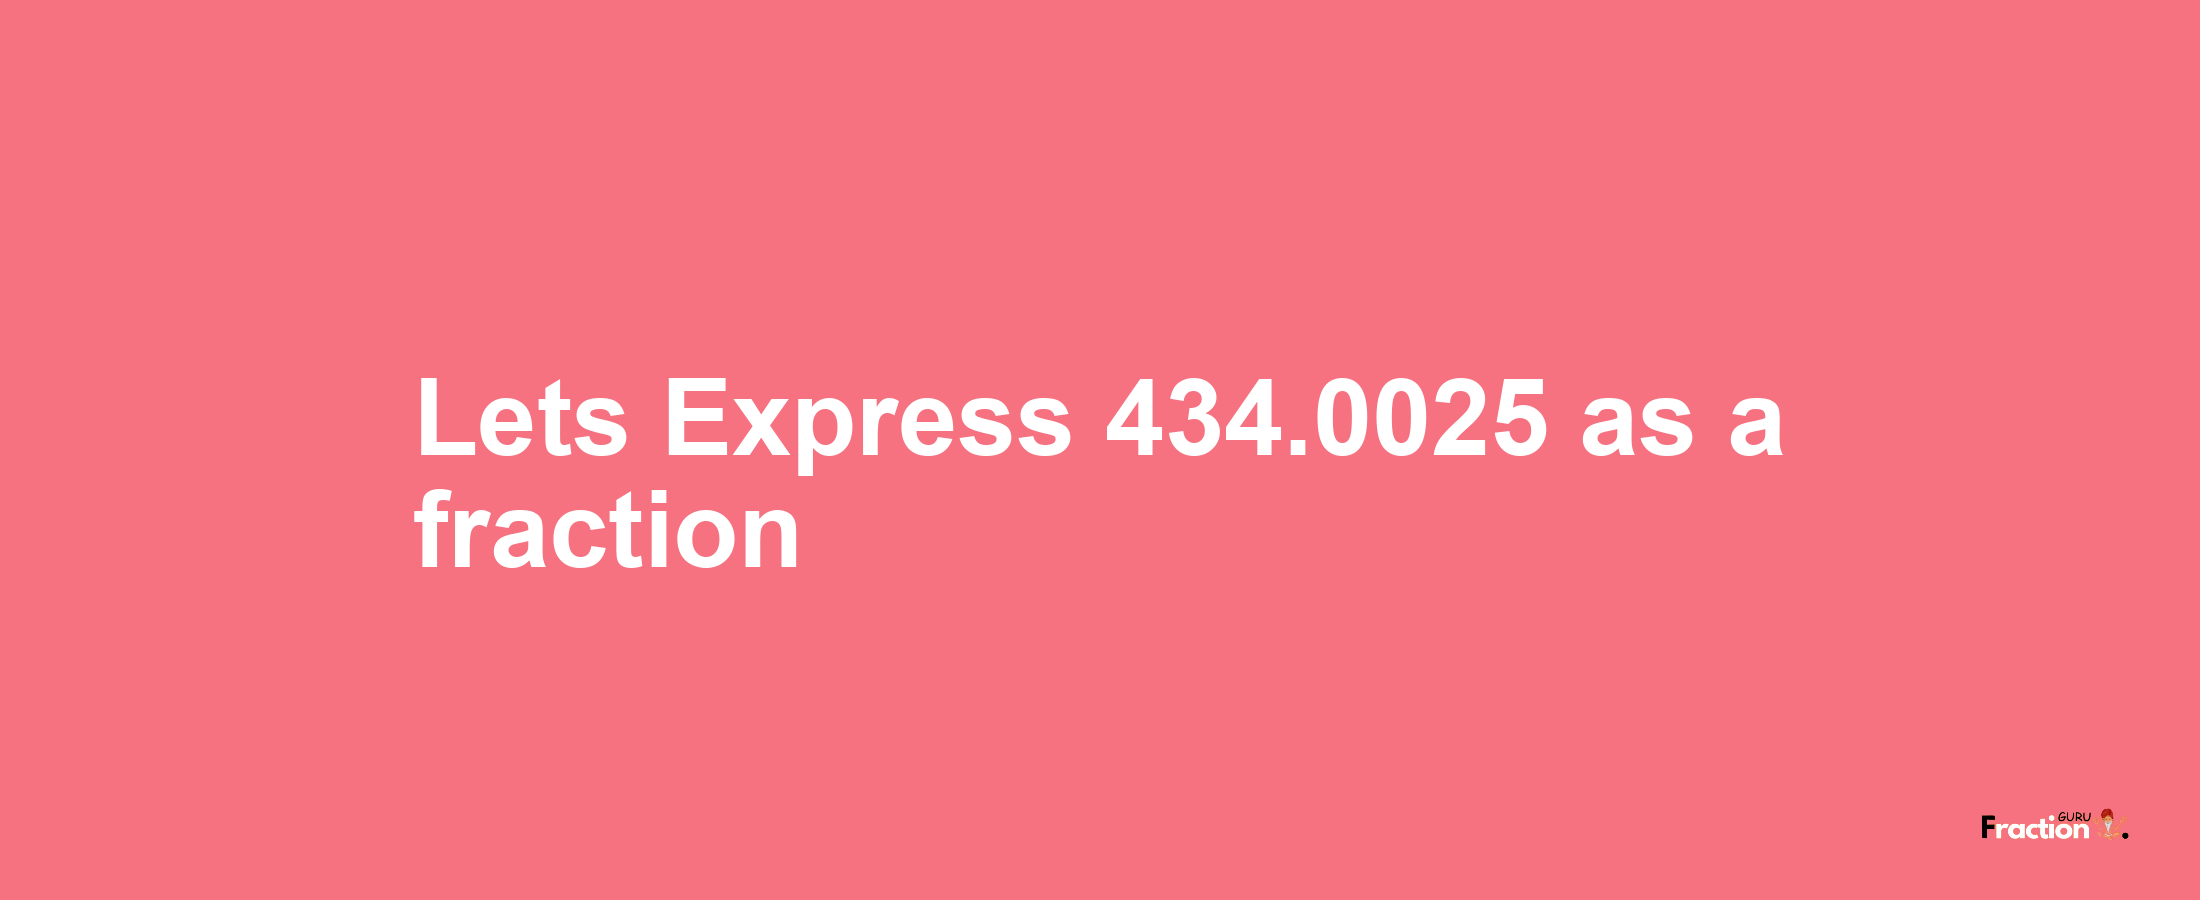 Lets Express 434.0025 as afraction